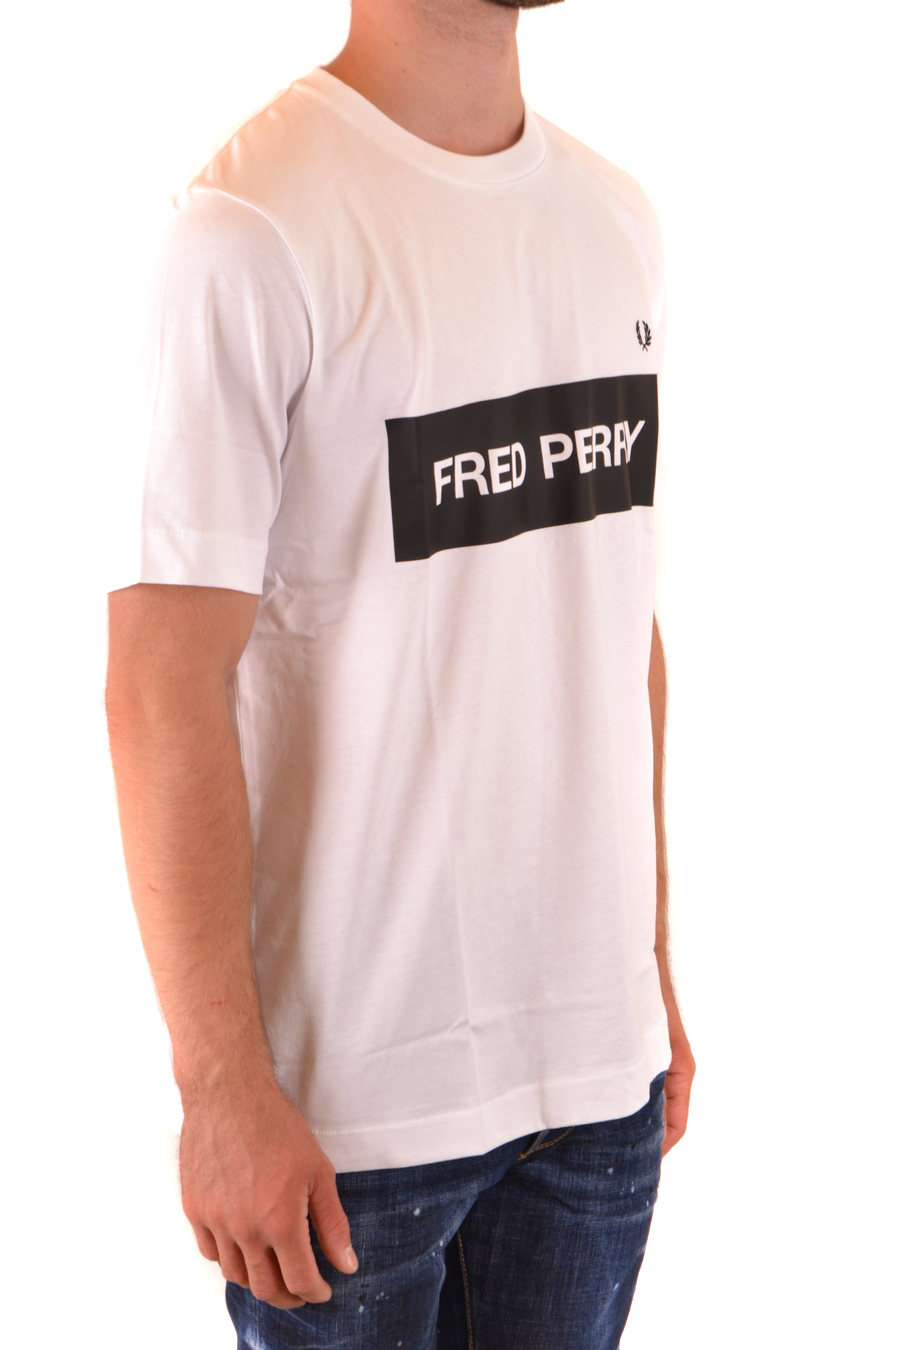 Fred Perry T-shirts | eBay